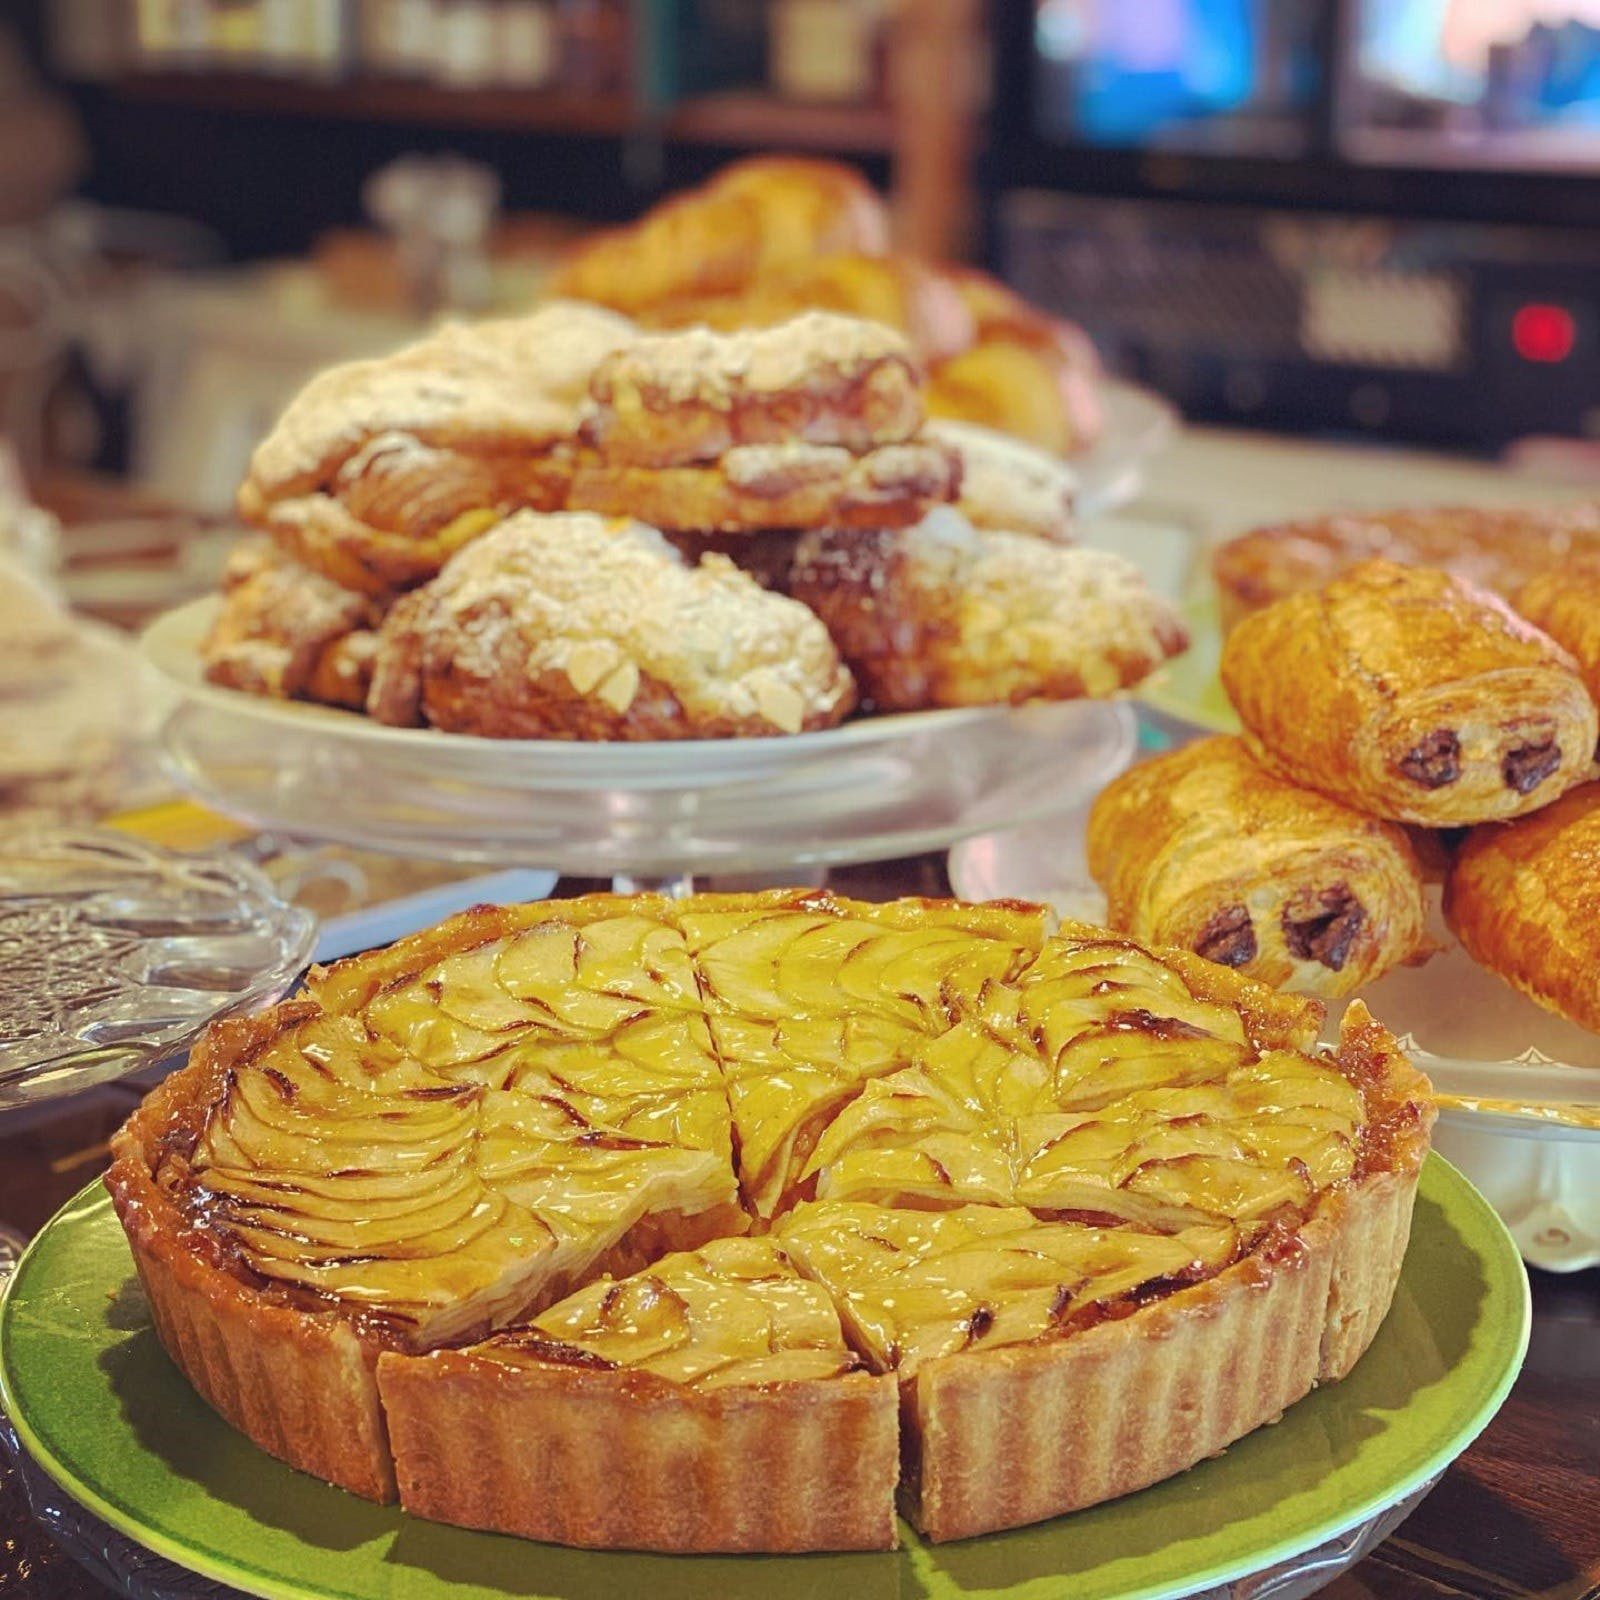 Pastries and pies